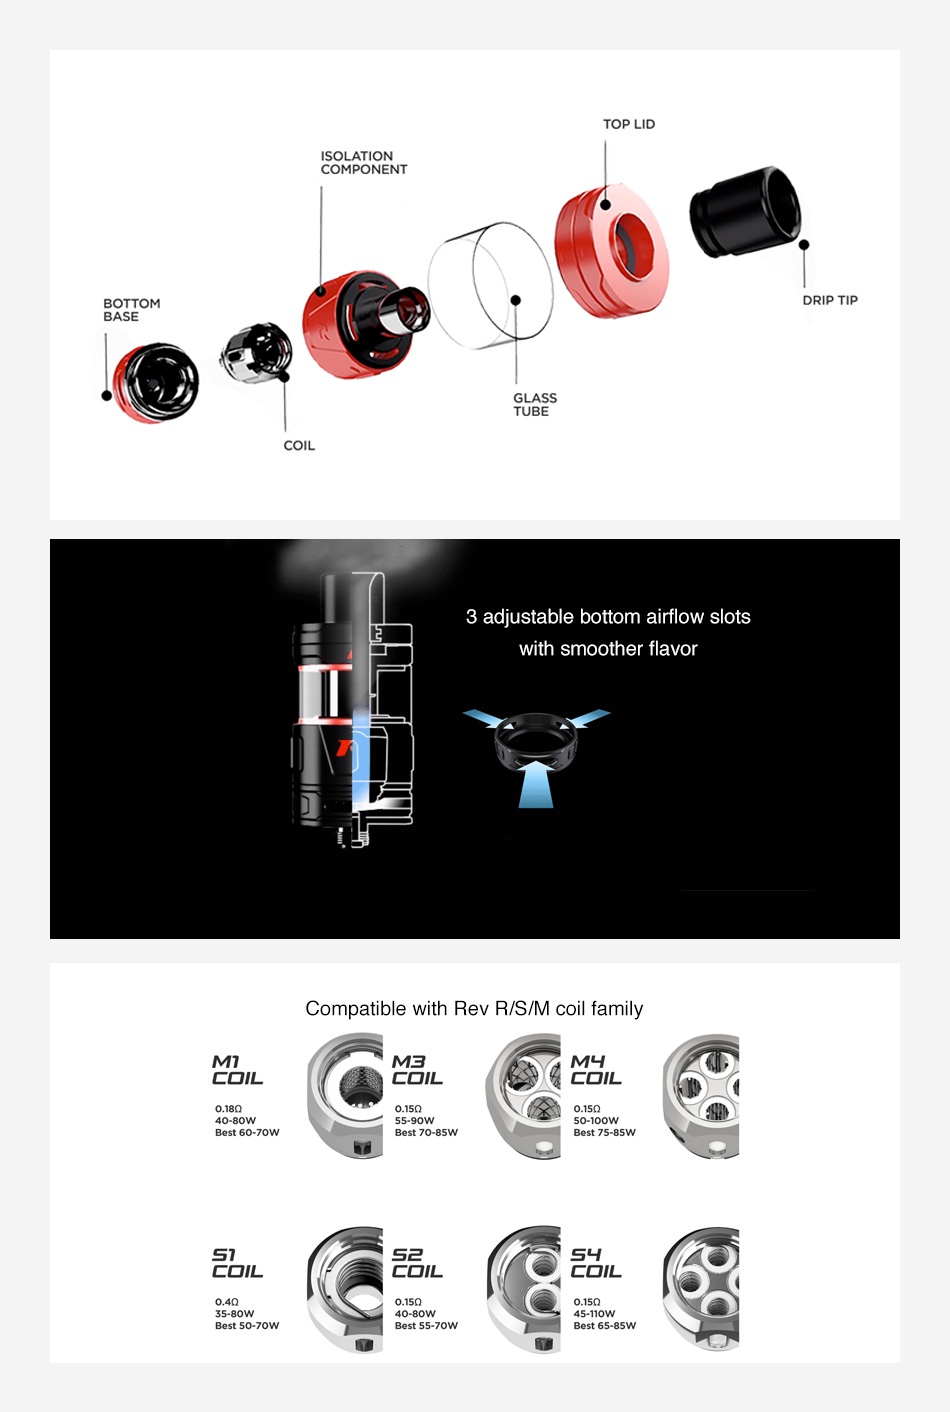 REV Drift II Subohm Tank 2ml/5ml TOP LID LATION MPONENT BOTTOM DRIP TIP BASE TUBE 3 adjustable bottom airflow slots ith smoother fla Compatible with rev r s M coil family ME c L CoIL CoIL Best 60 7ow Best 70 85W 35 80w Best 50 70W